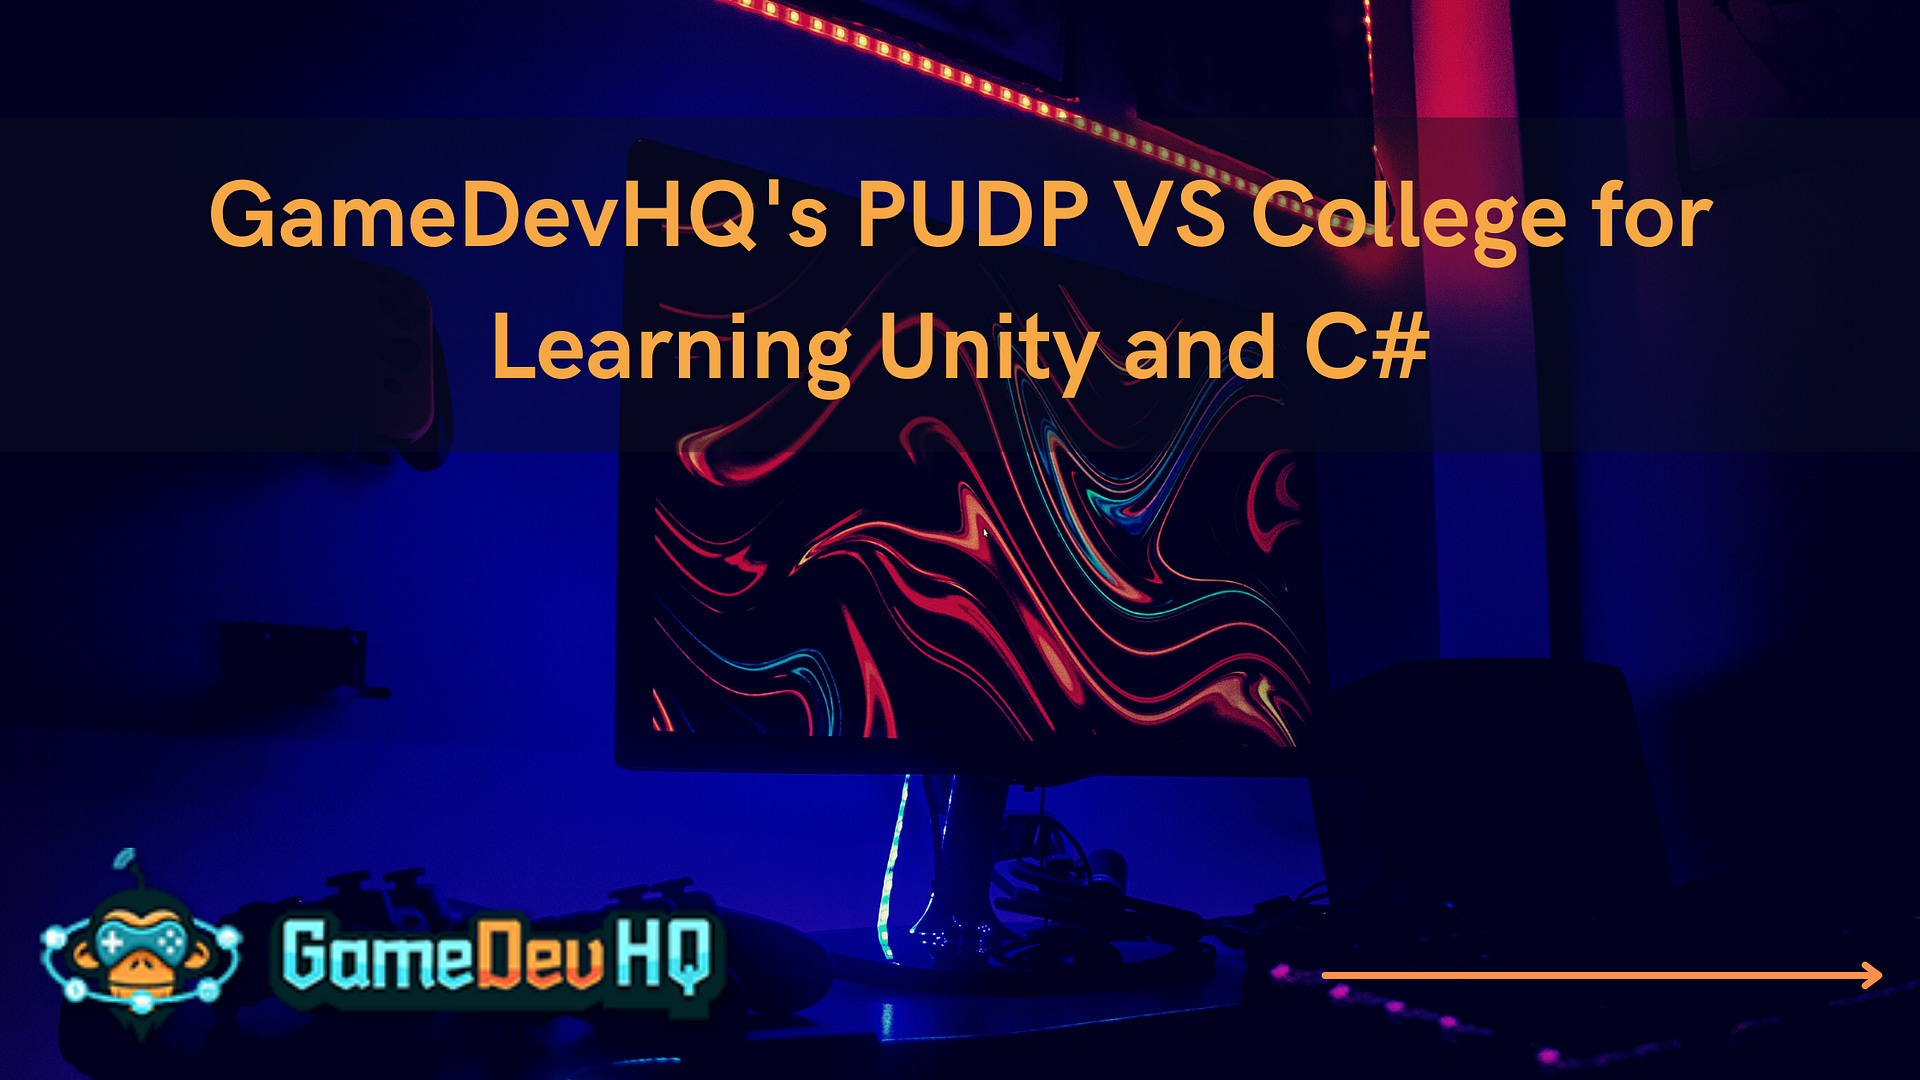 GameDevHQ's PUDP VS College for Learning Unity and C#